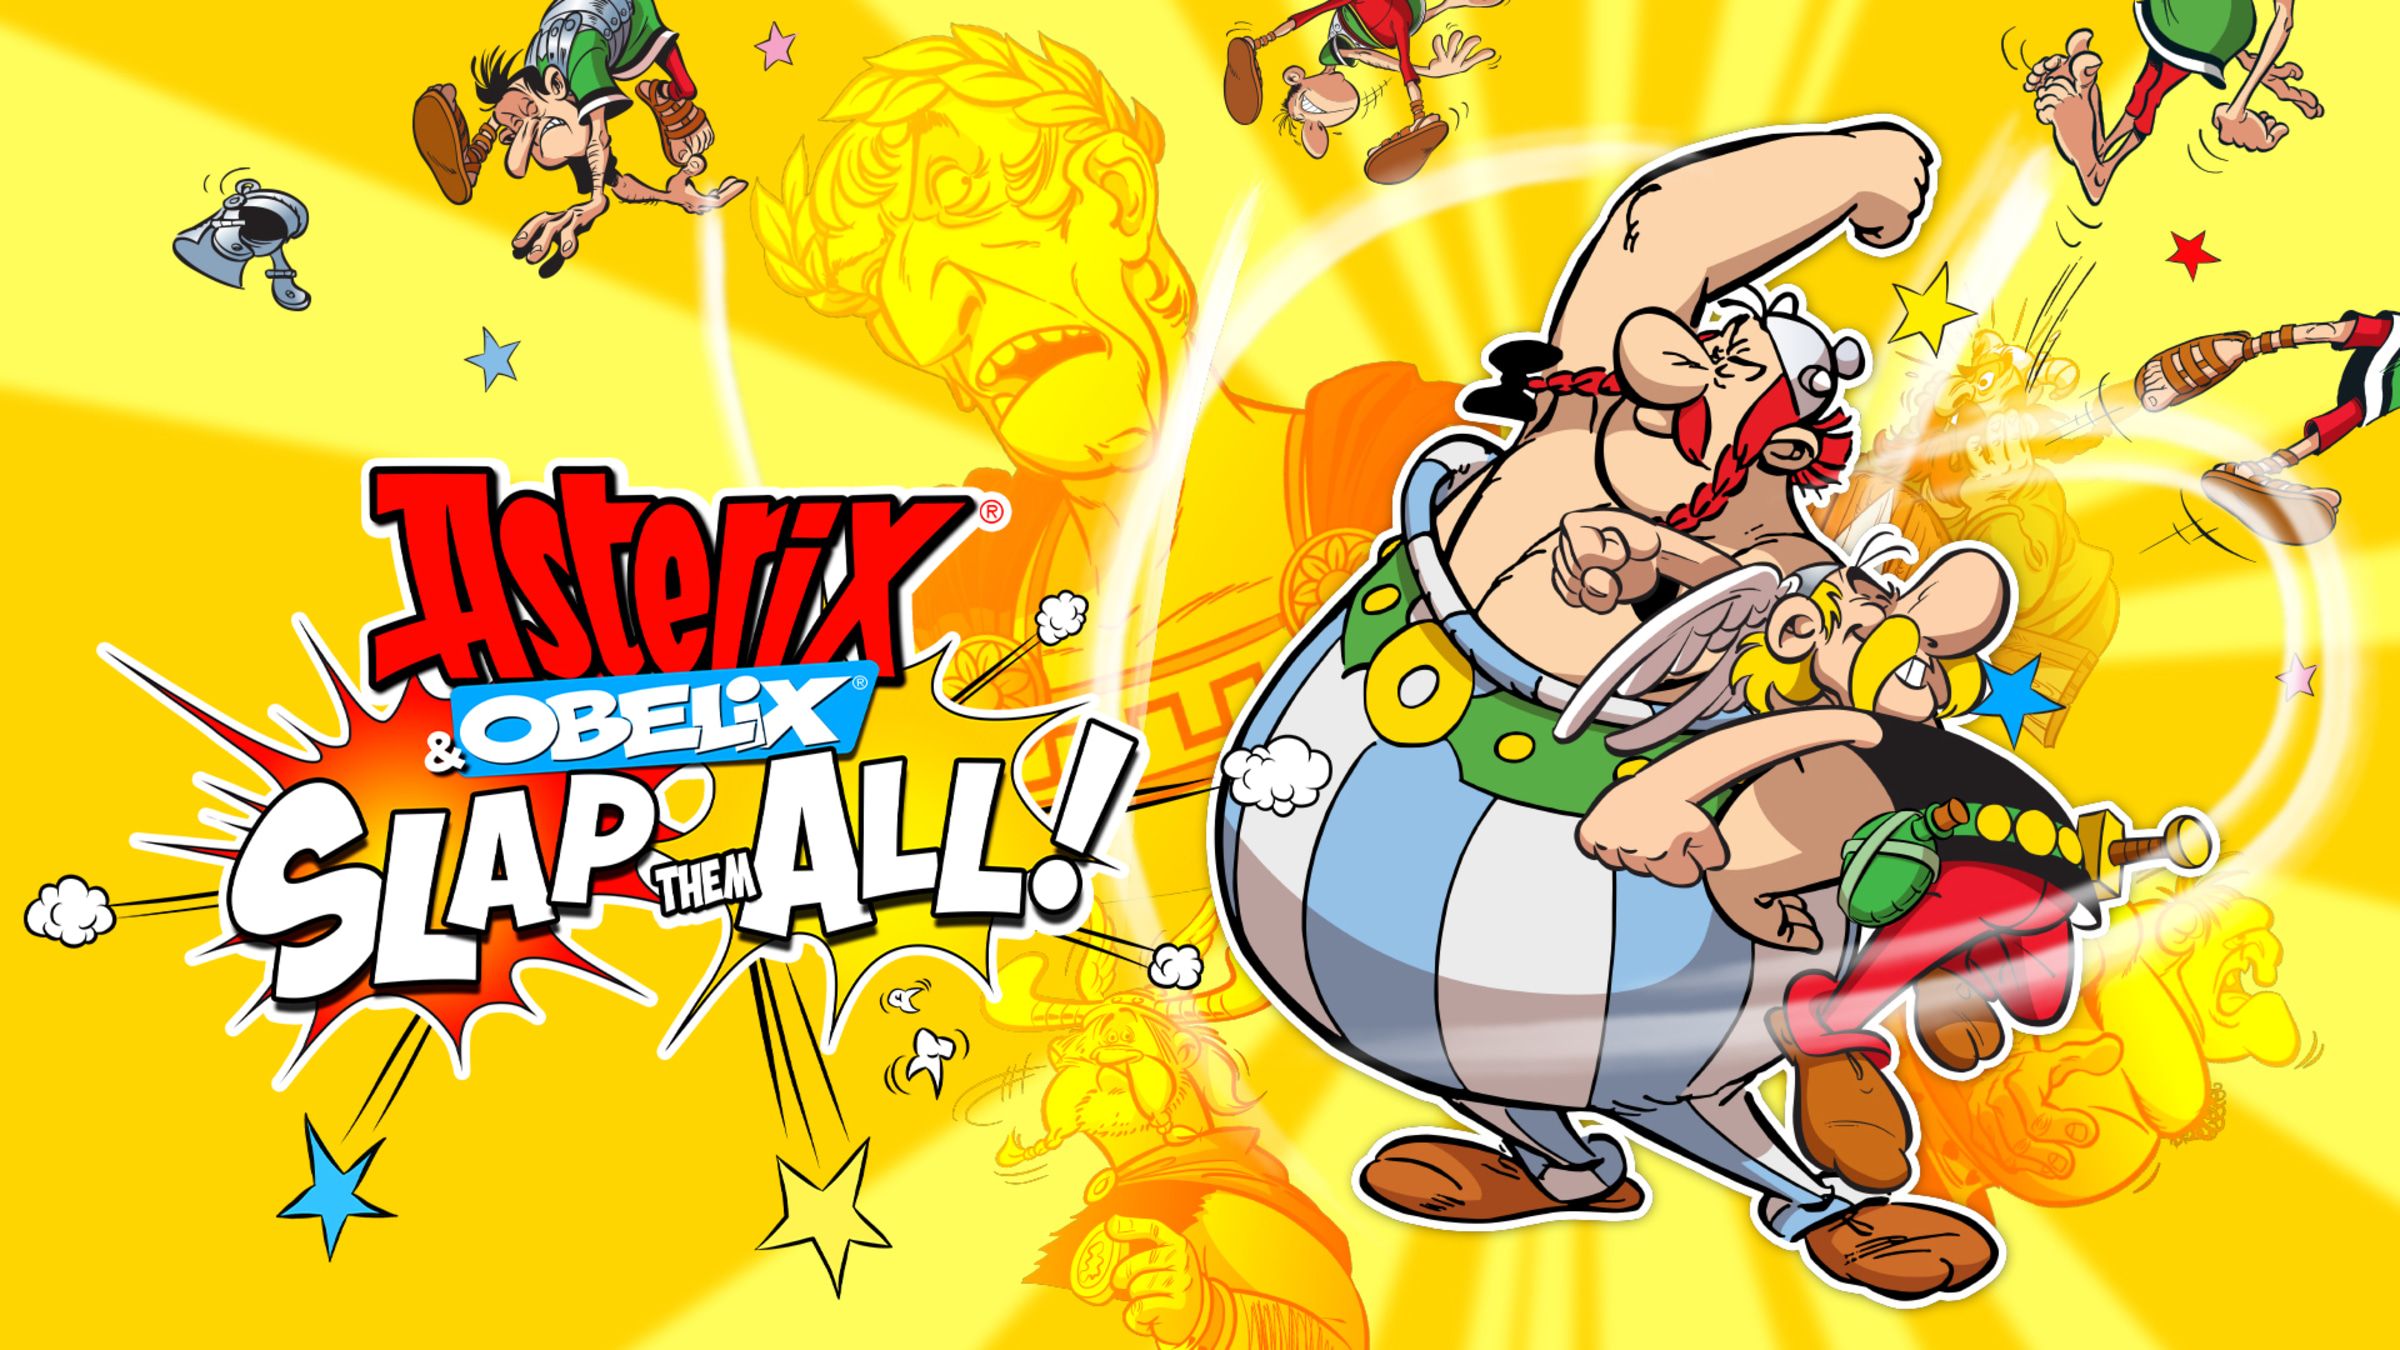 Asterix the Gaul - Asterix - The official website